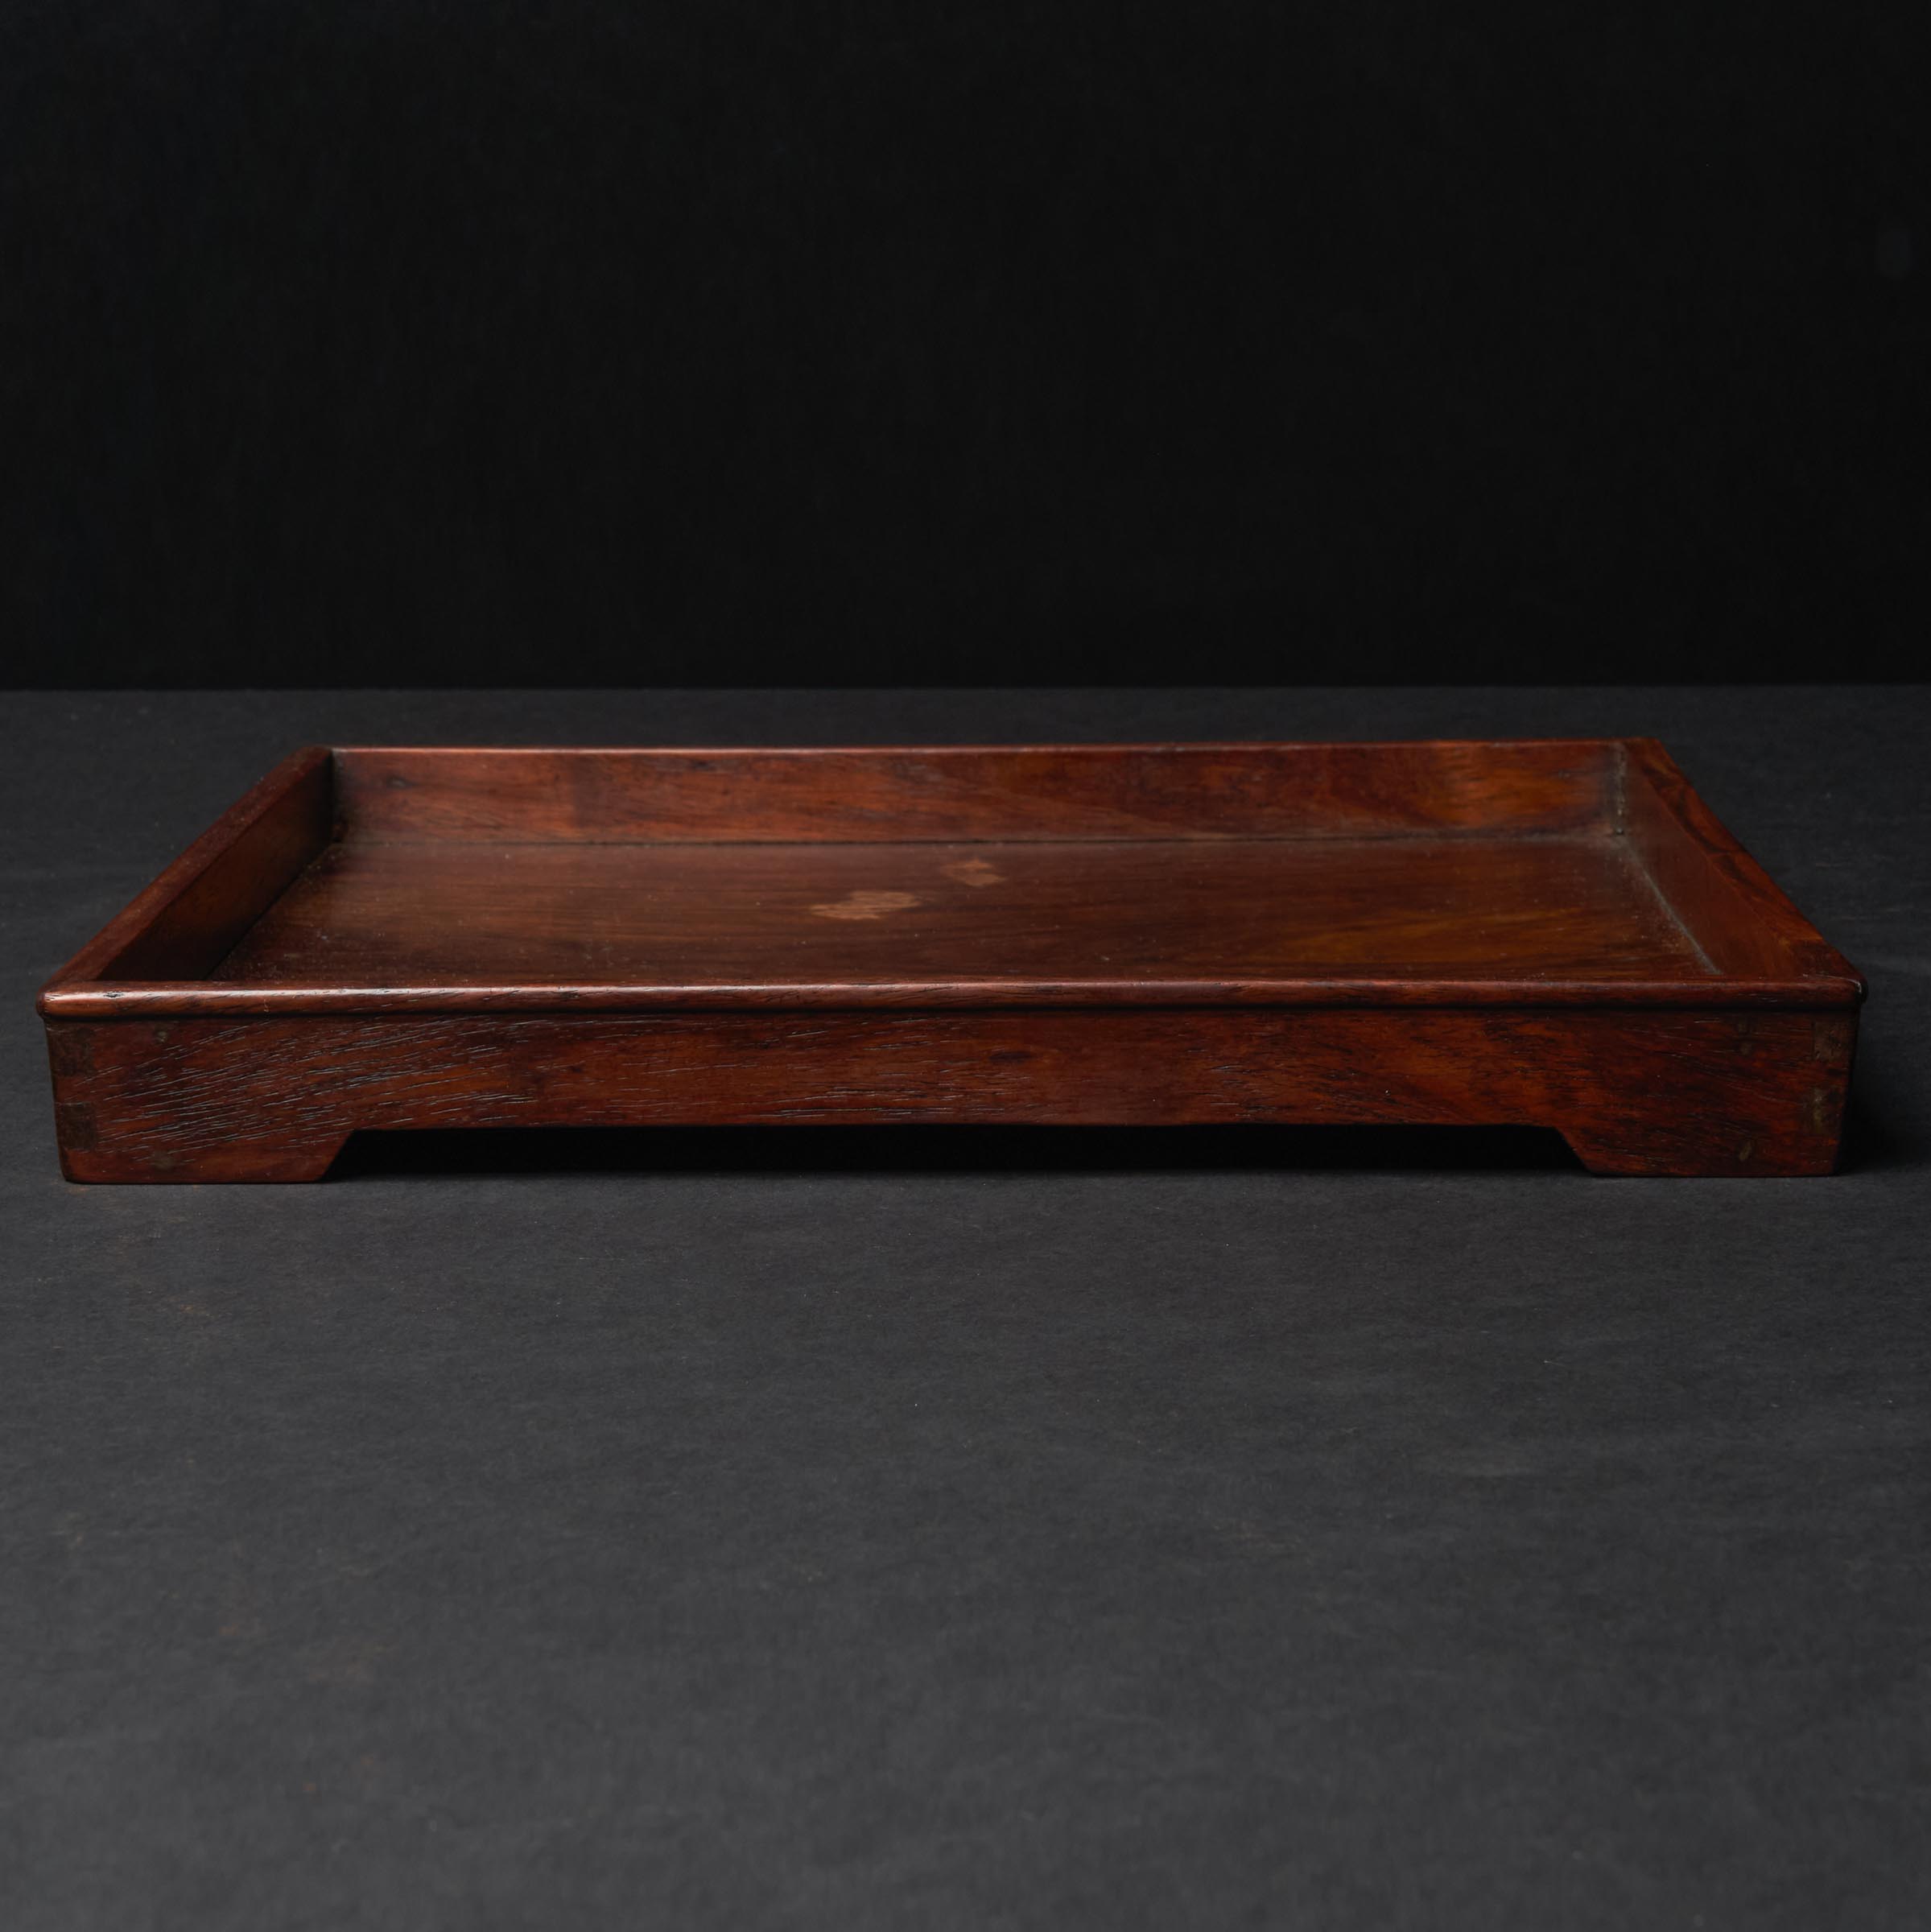 A Huanghuali Square Scholar's Tray, 18th Century